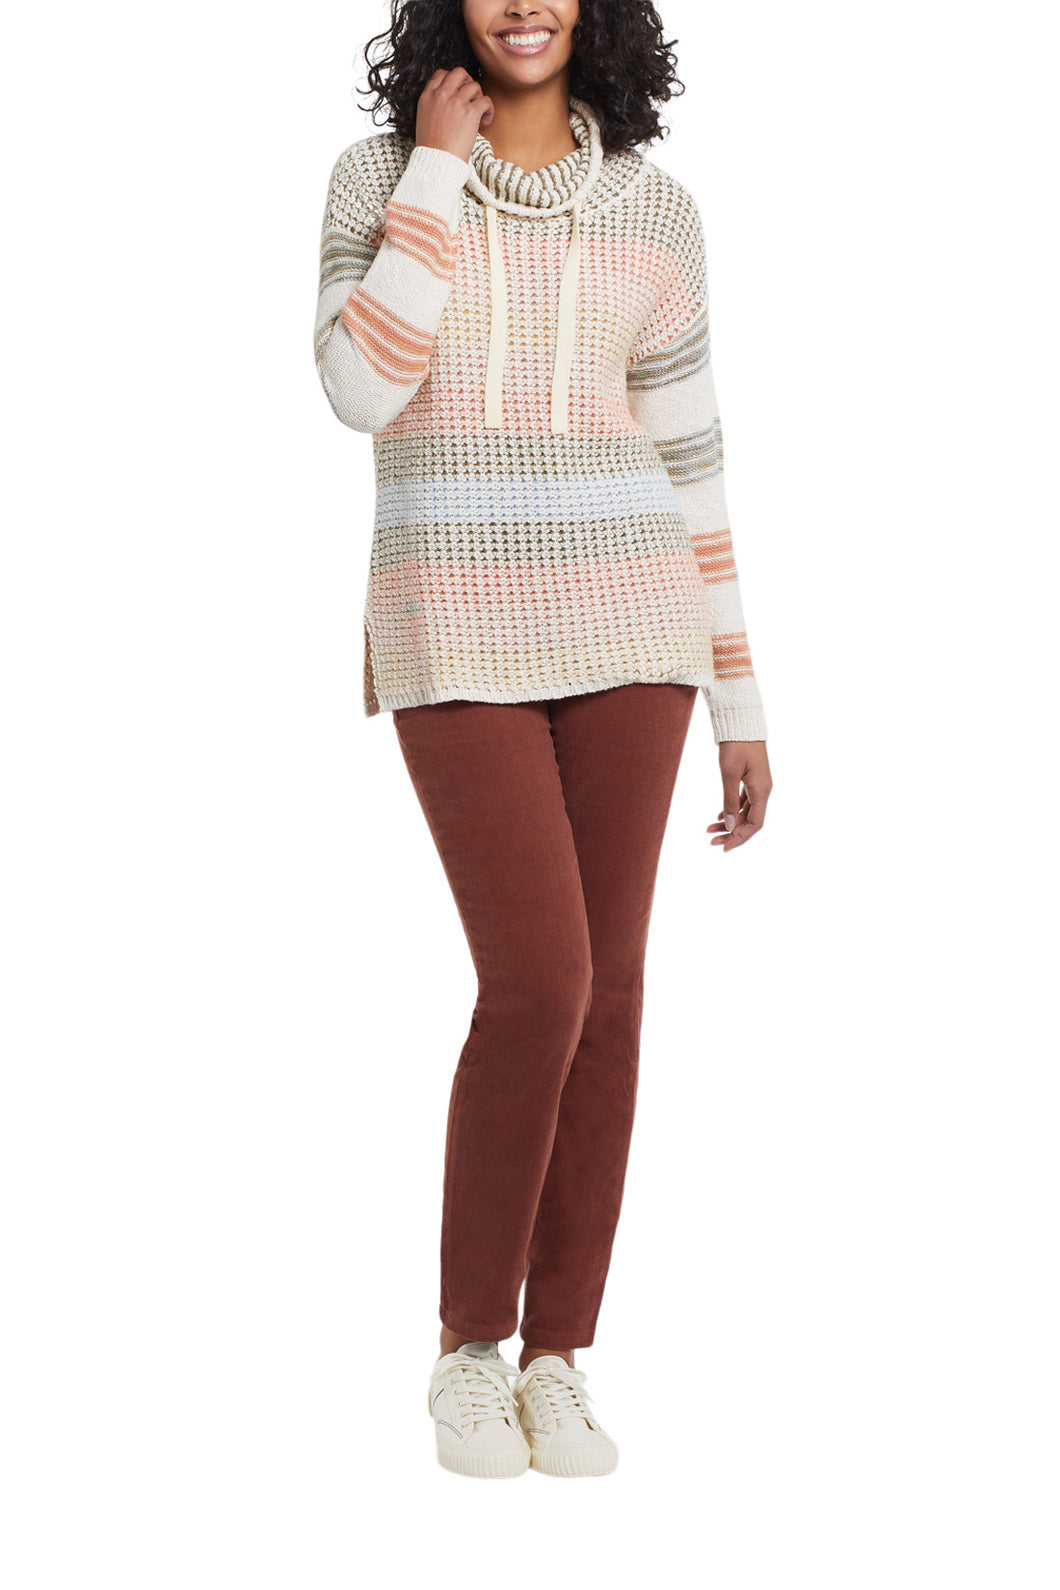 This stylish cowl neck sweater with drawstring neck is even more fabulous in person. With a hint of sportiness, this textured sweater really stands out with its contrasting color pattern.  This sweater will become a favorite to wear whether you are running errands or relaxing at home.  Color- Sedona-Cream with olive, light gold, orange and light blue. Pop-over mock neck with drawstring. Relaxed fit. Drop shoulder. Long sleeve. Contrasting stripe sleeves.